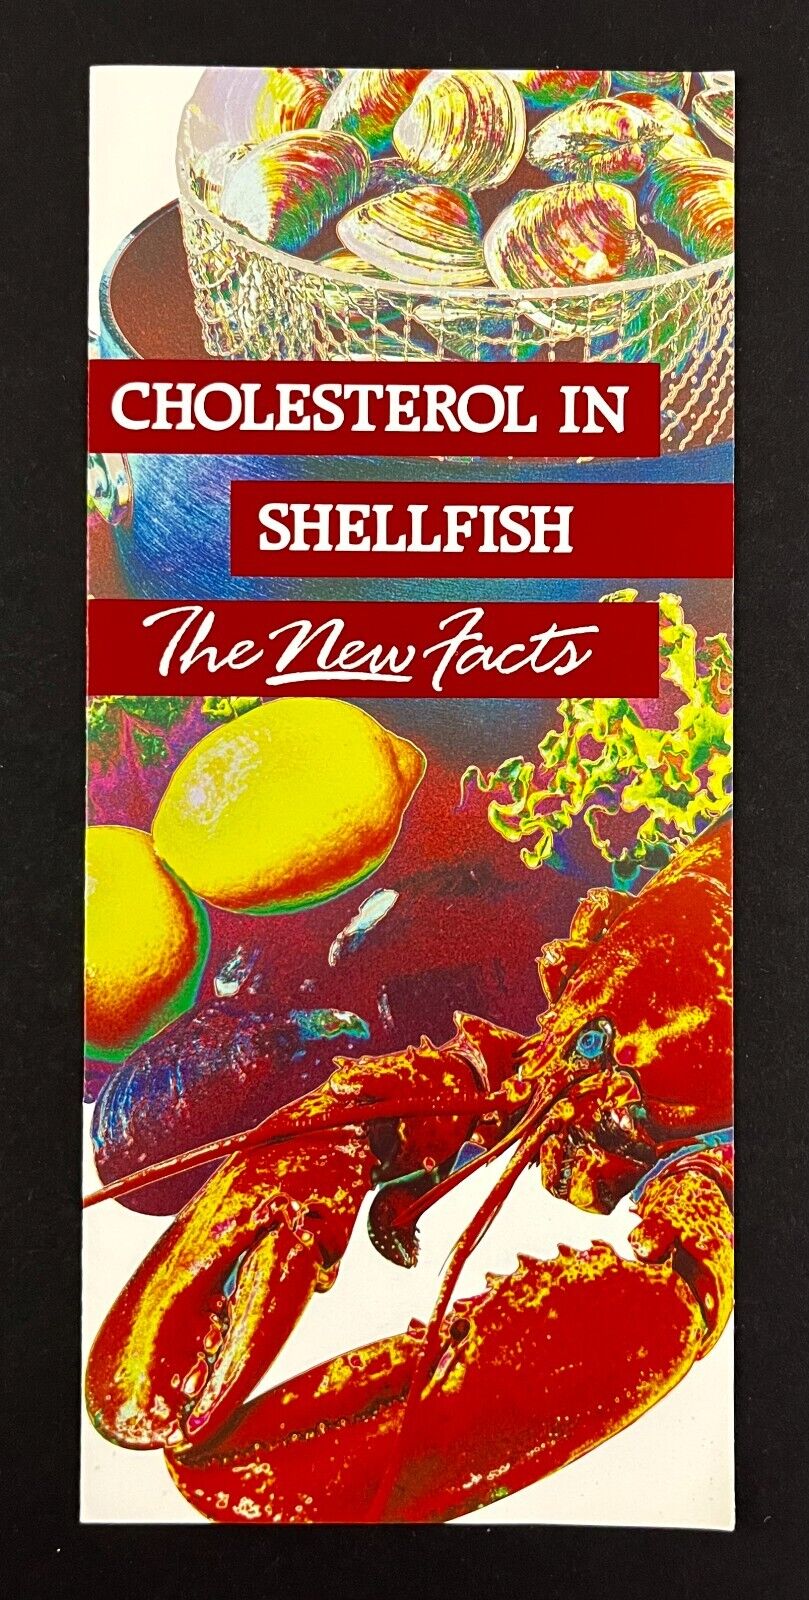 1990s Red Lobster Shellfish Cholesterol New Facts Health Info Vintage Brochure